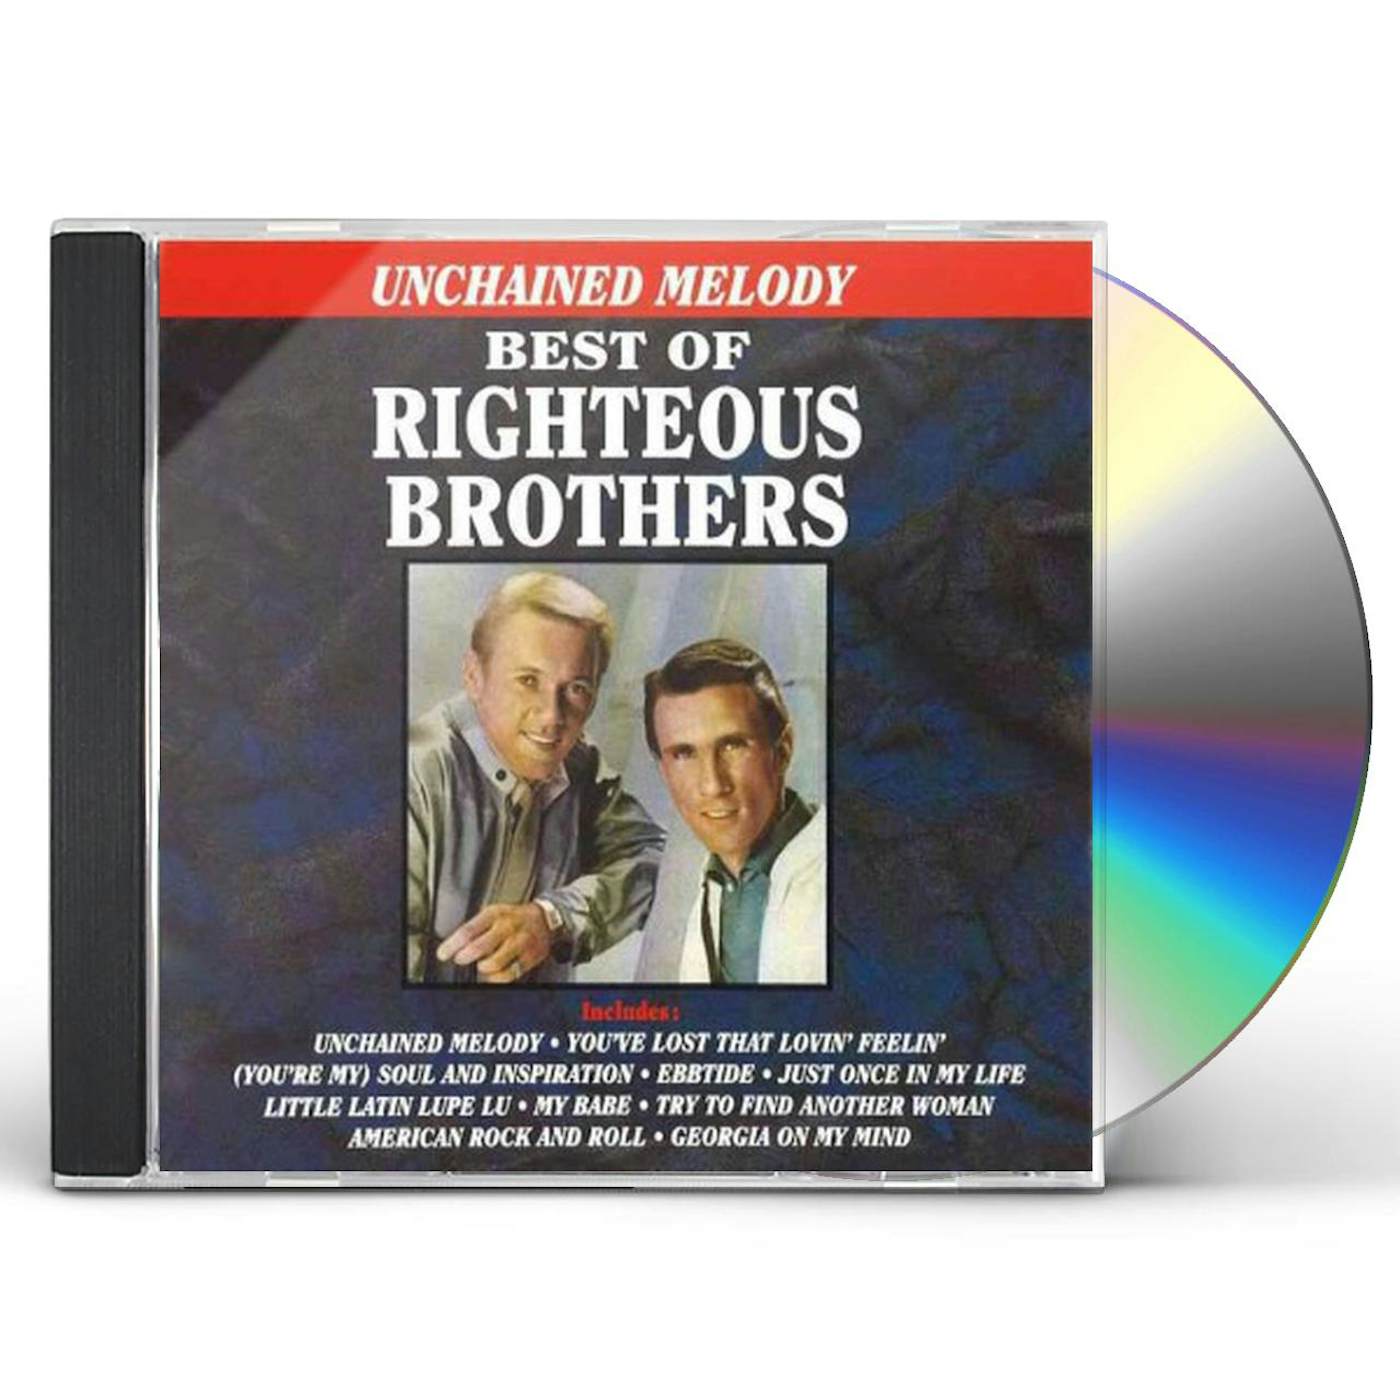 The Righteous Brothers UNCHAINED MELODY CD